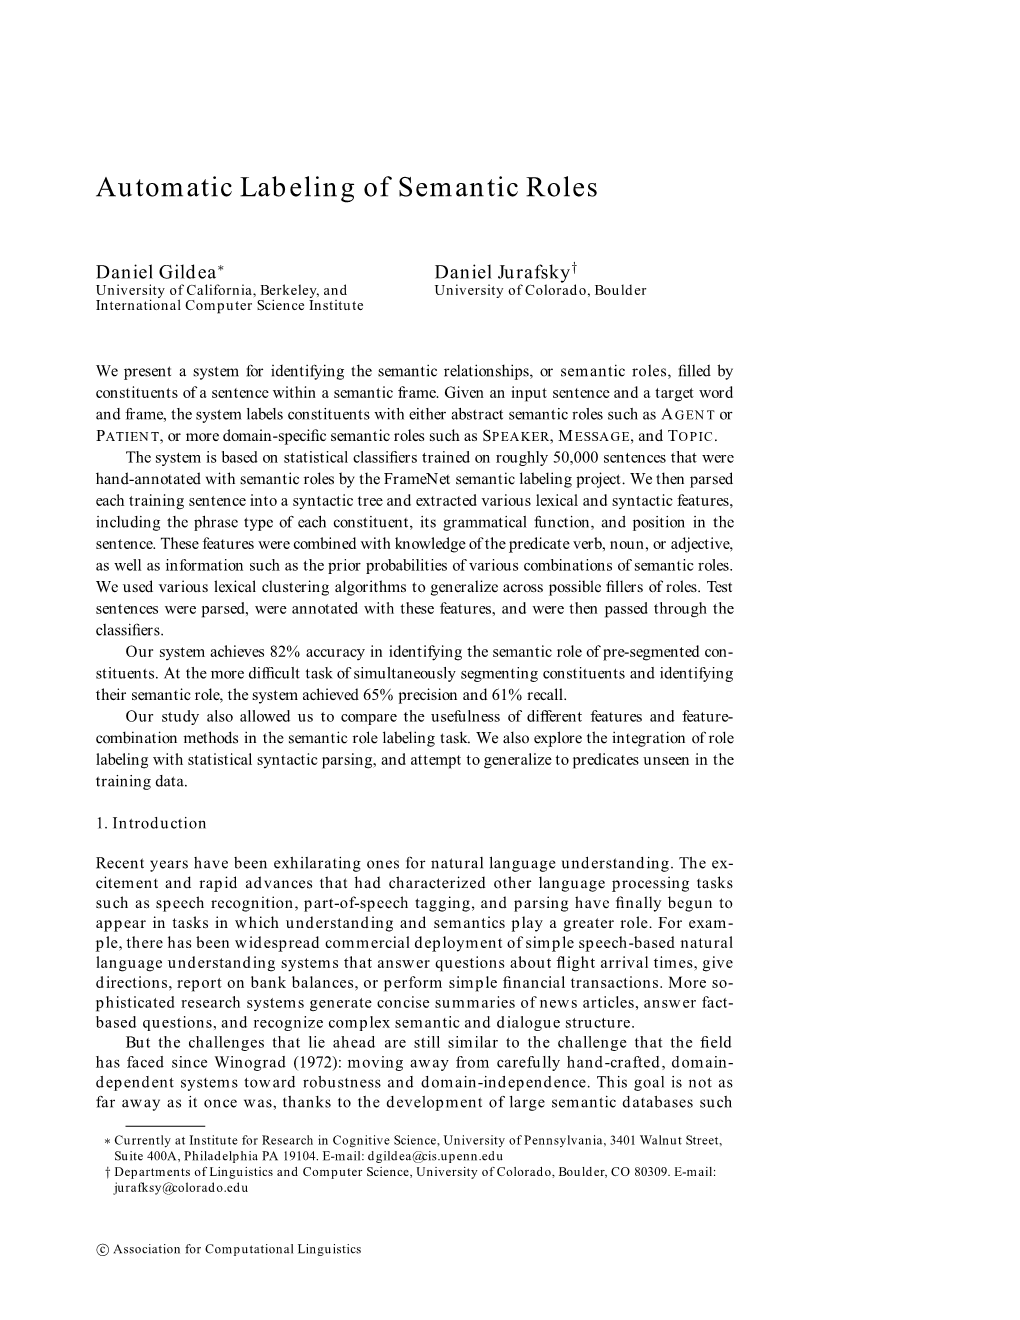 Automatic Labeling of Semantic Roles